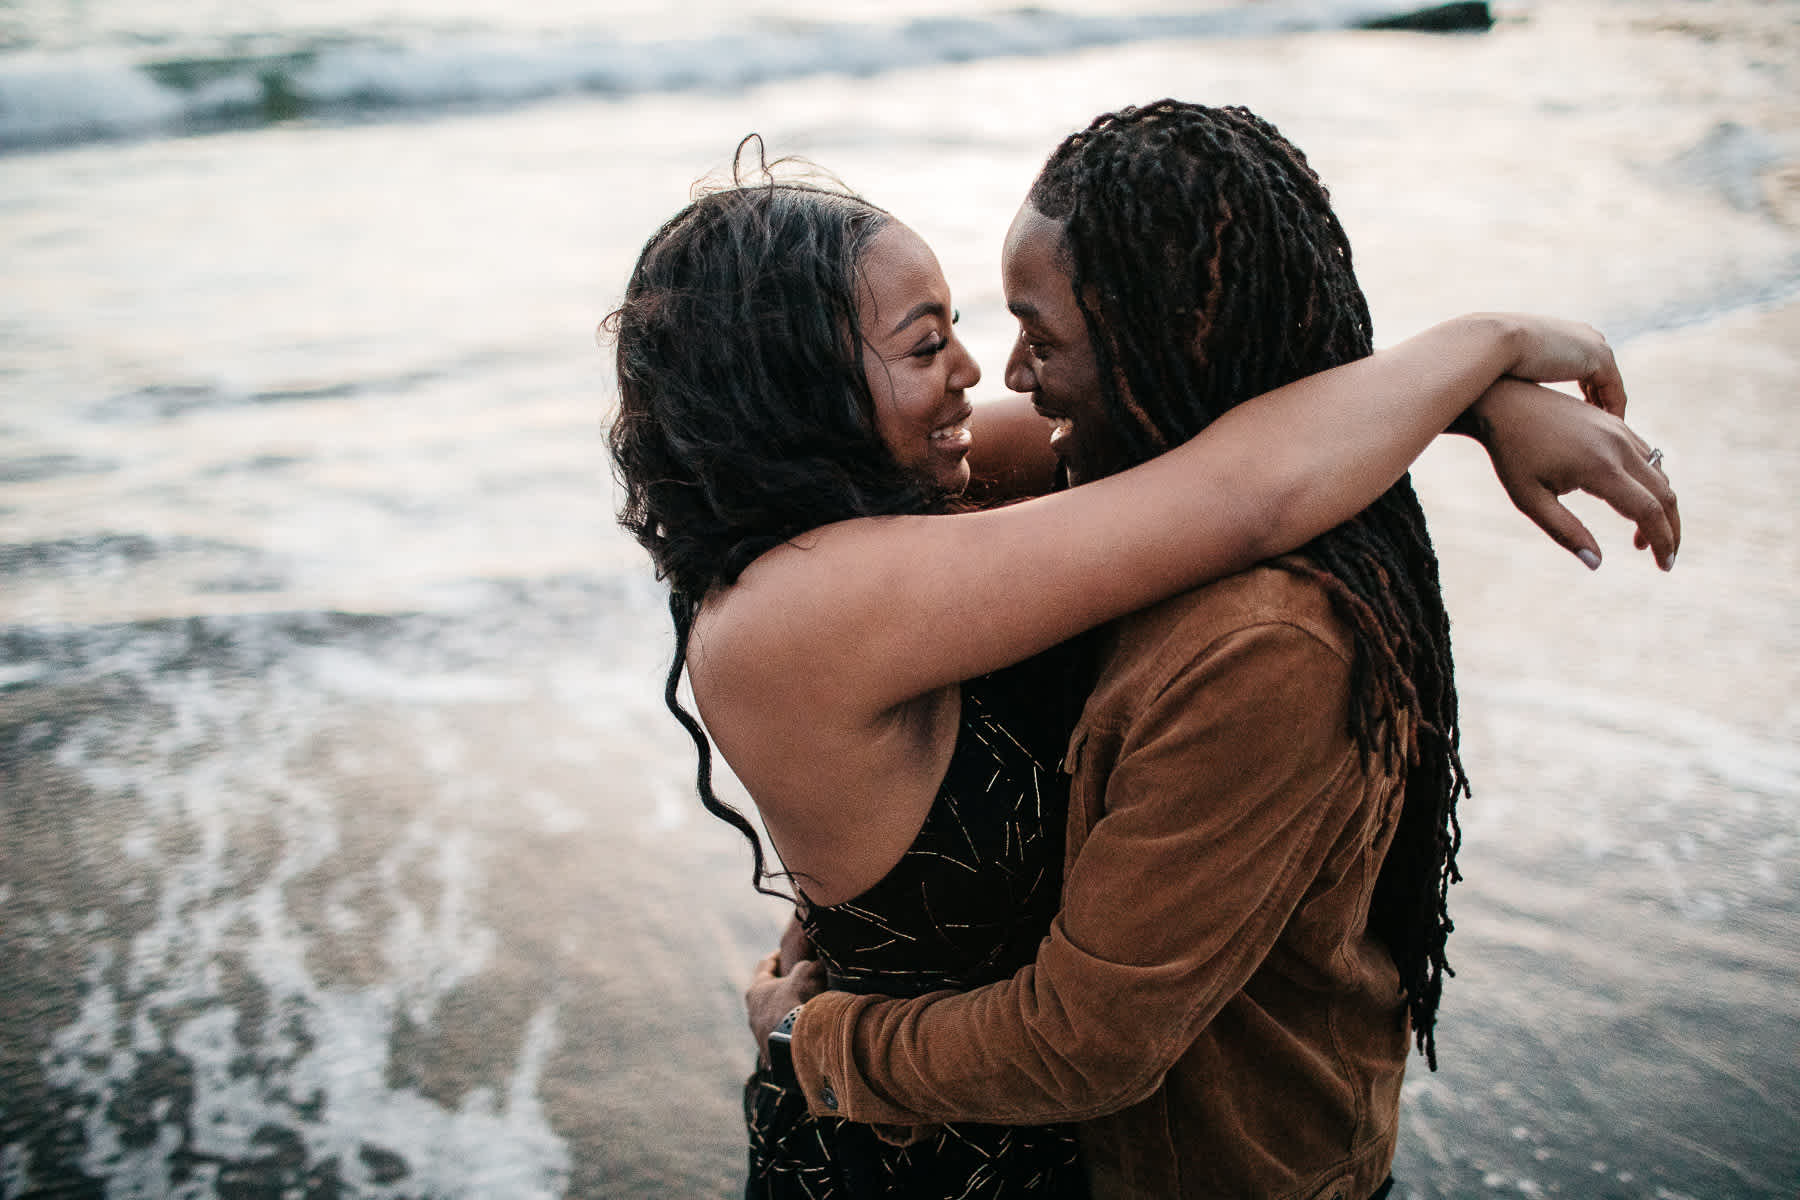 muir-beach-ca-spring-lifestyle-engagement-session-55